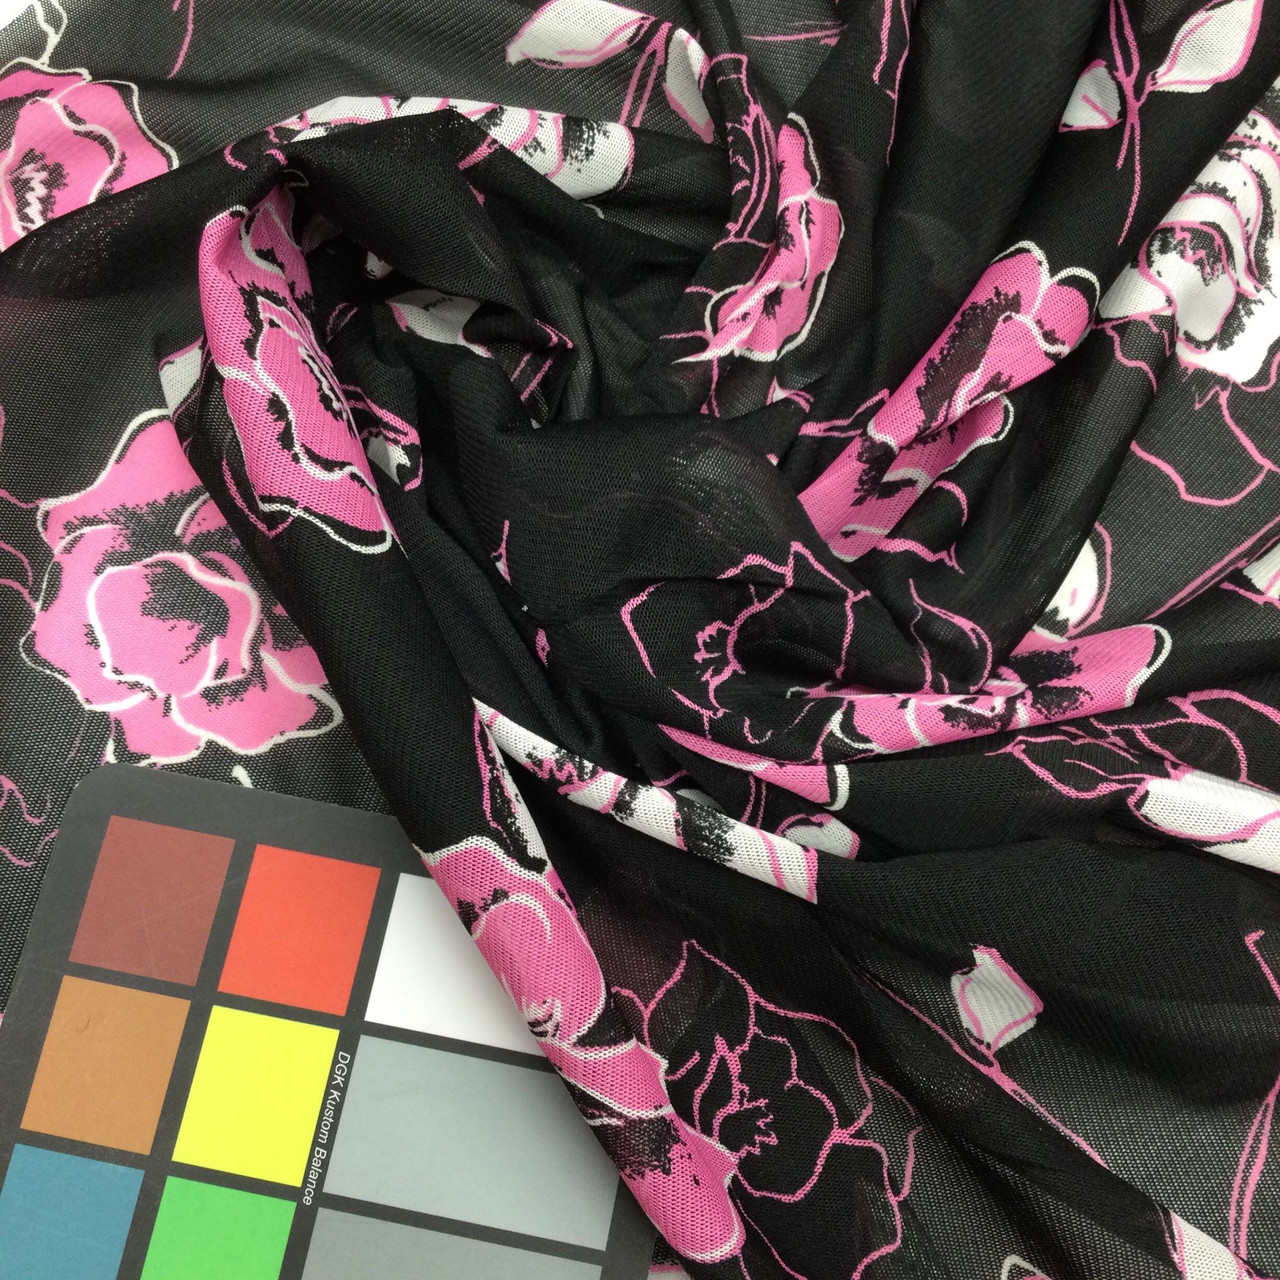 Black and Pink Floral Print Mesh Fabric, Stretch Sheer Lightweight